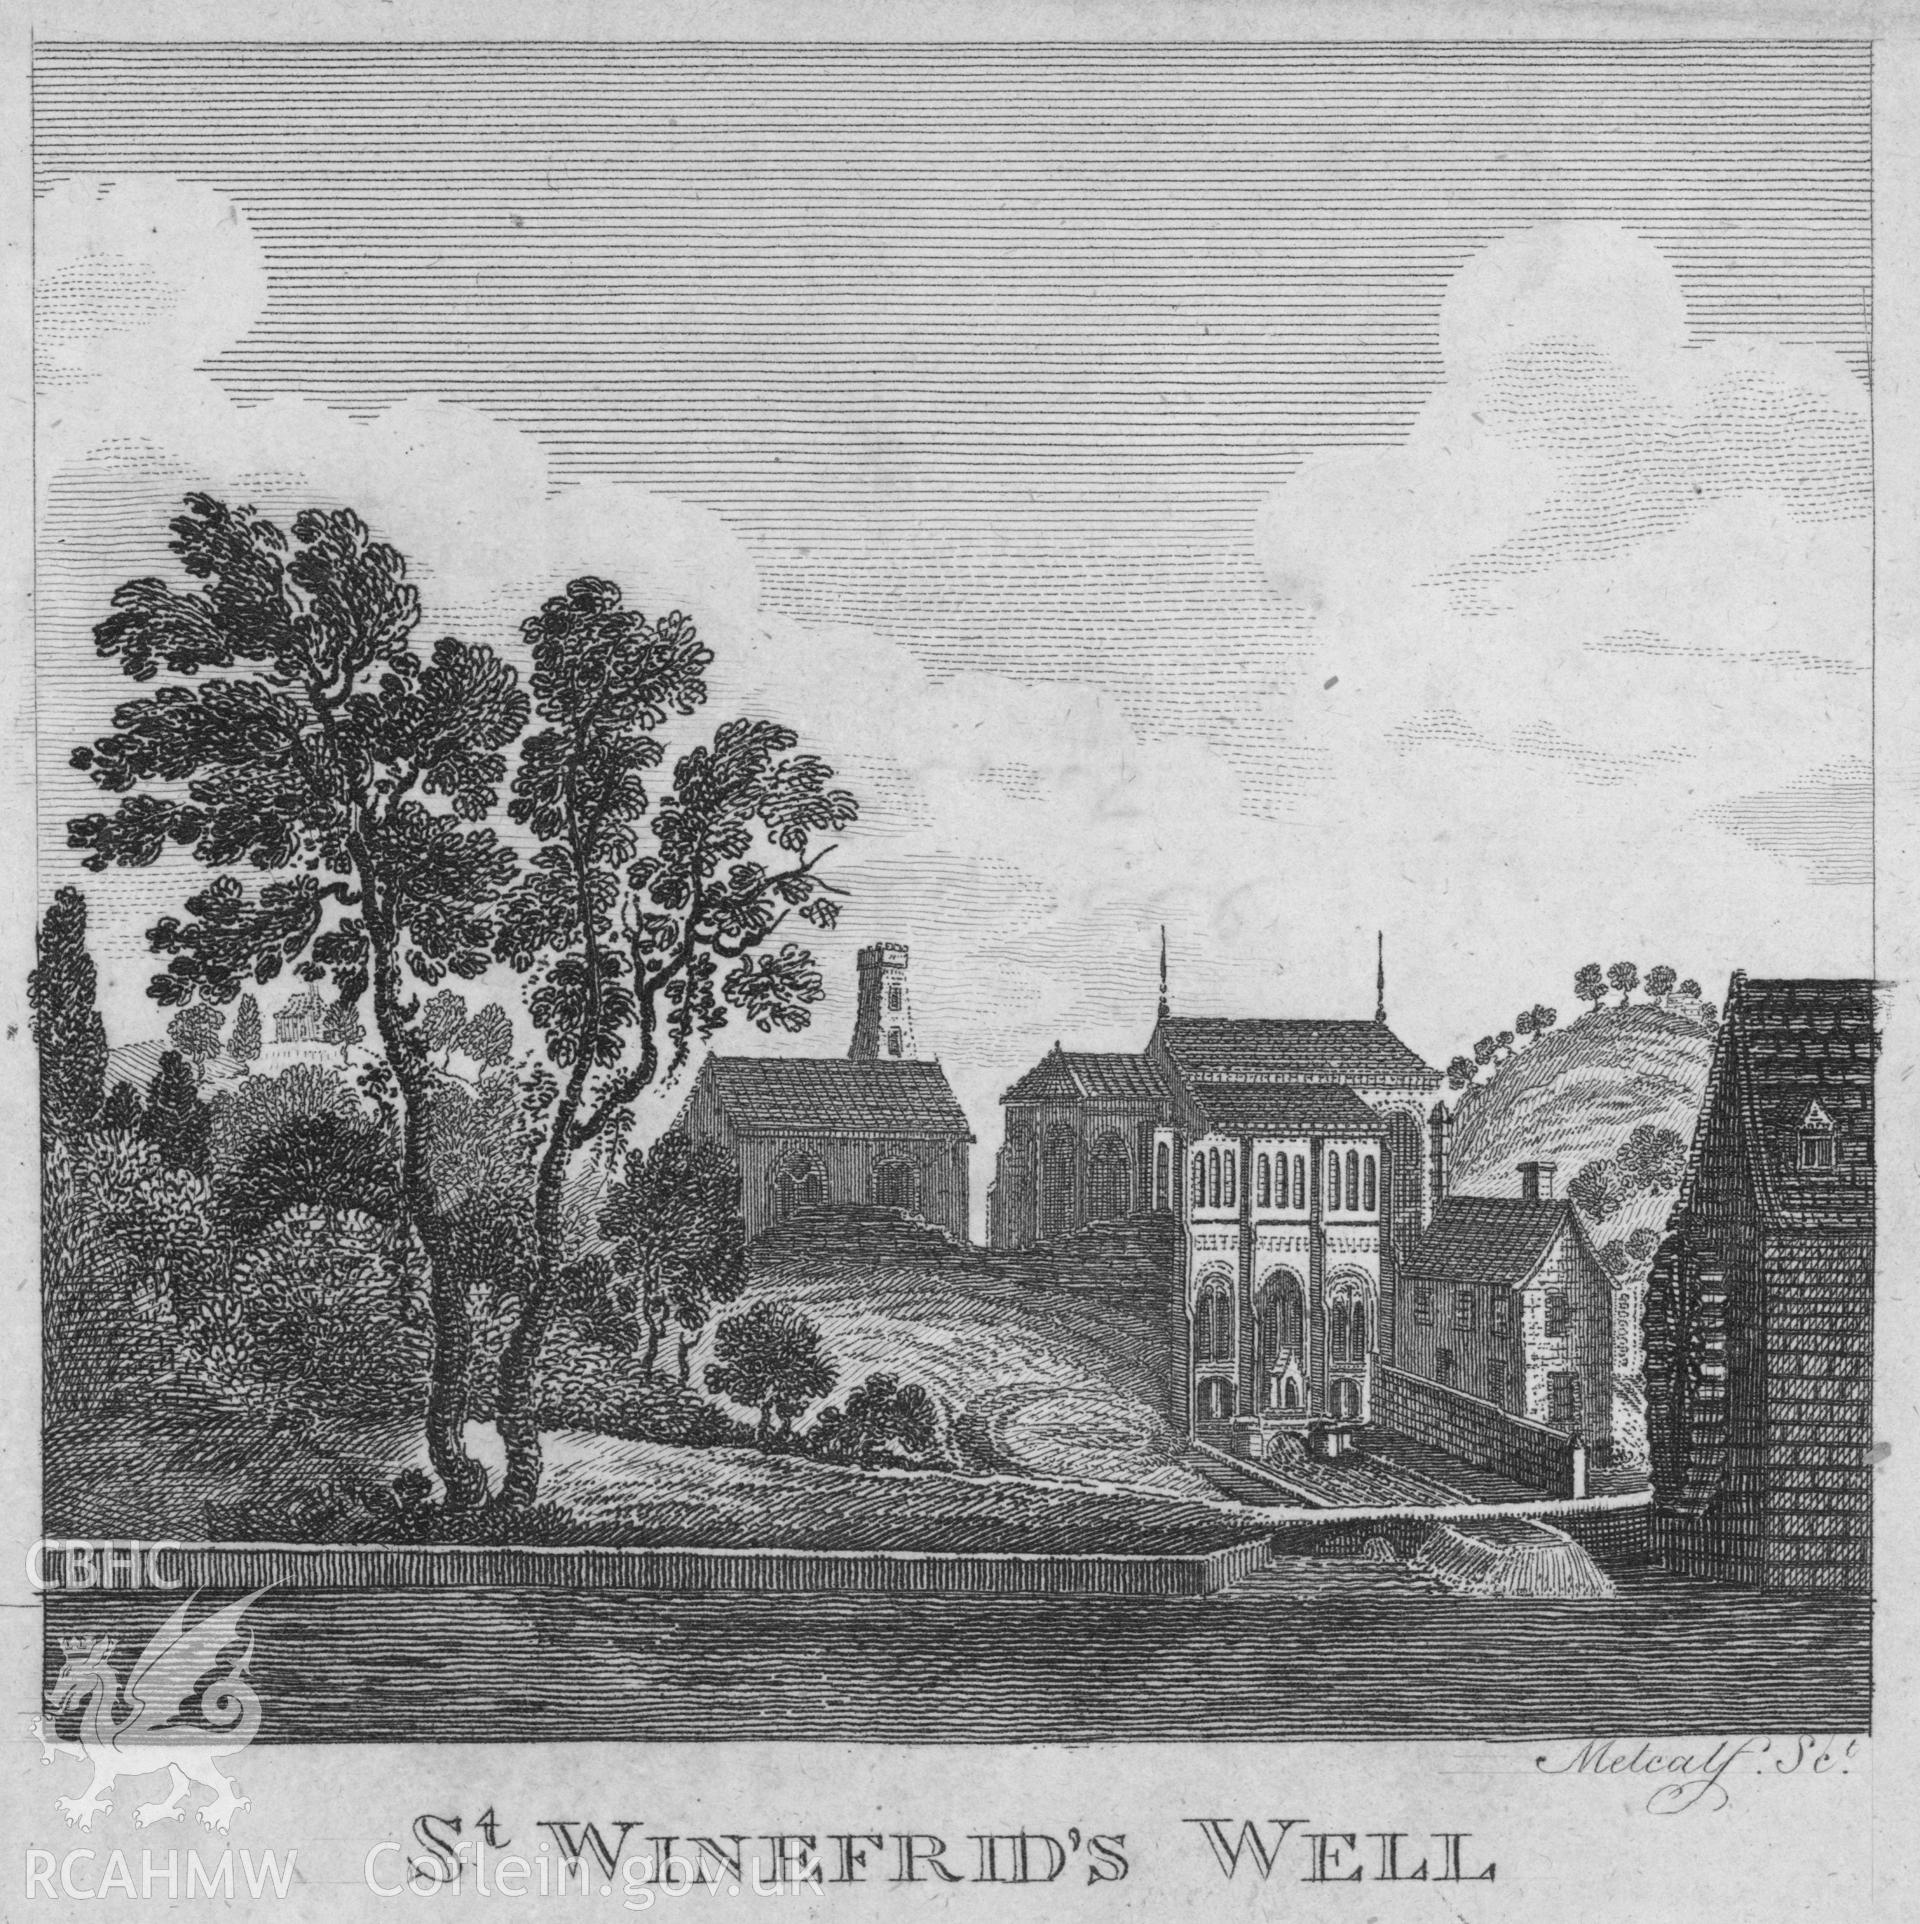 Digital copy of an etching showing St Winifreds Well.